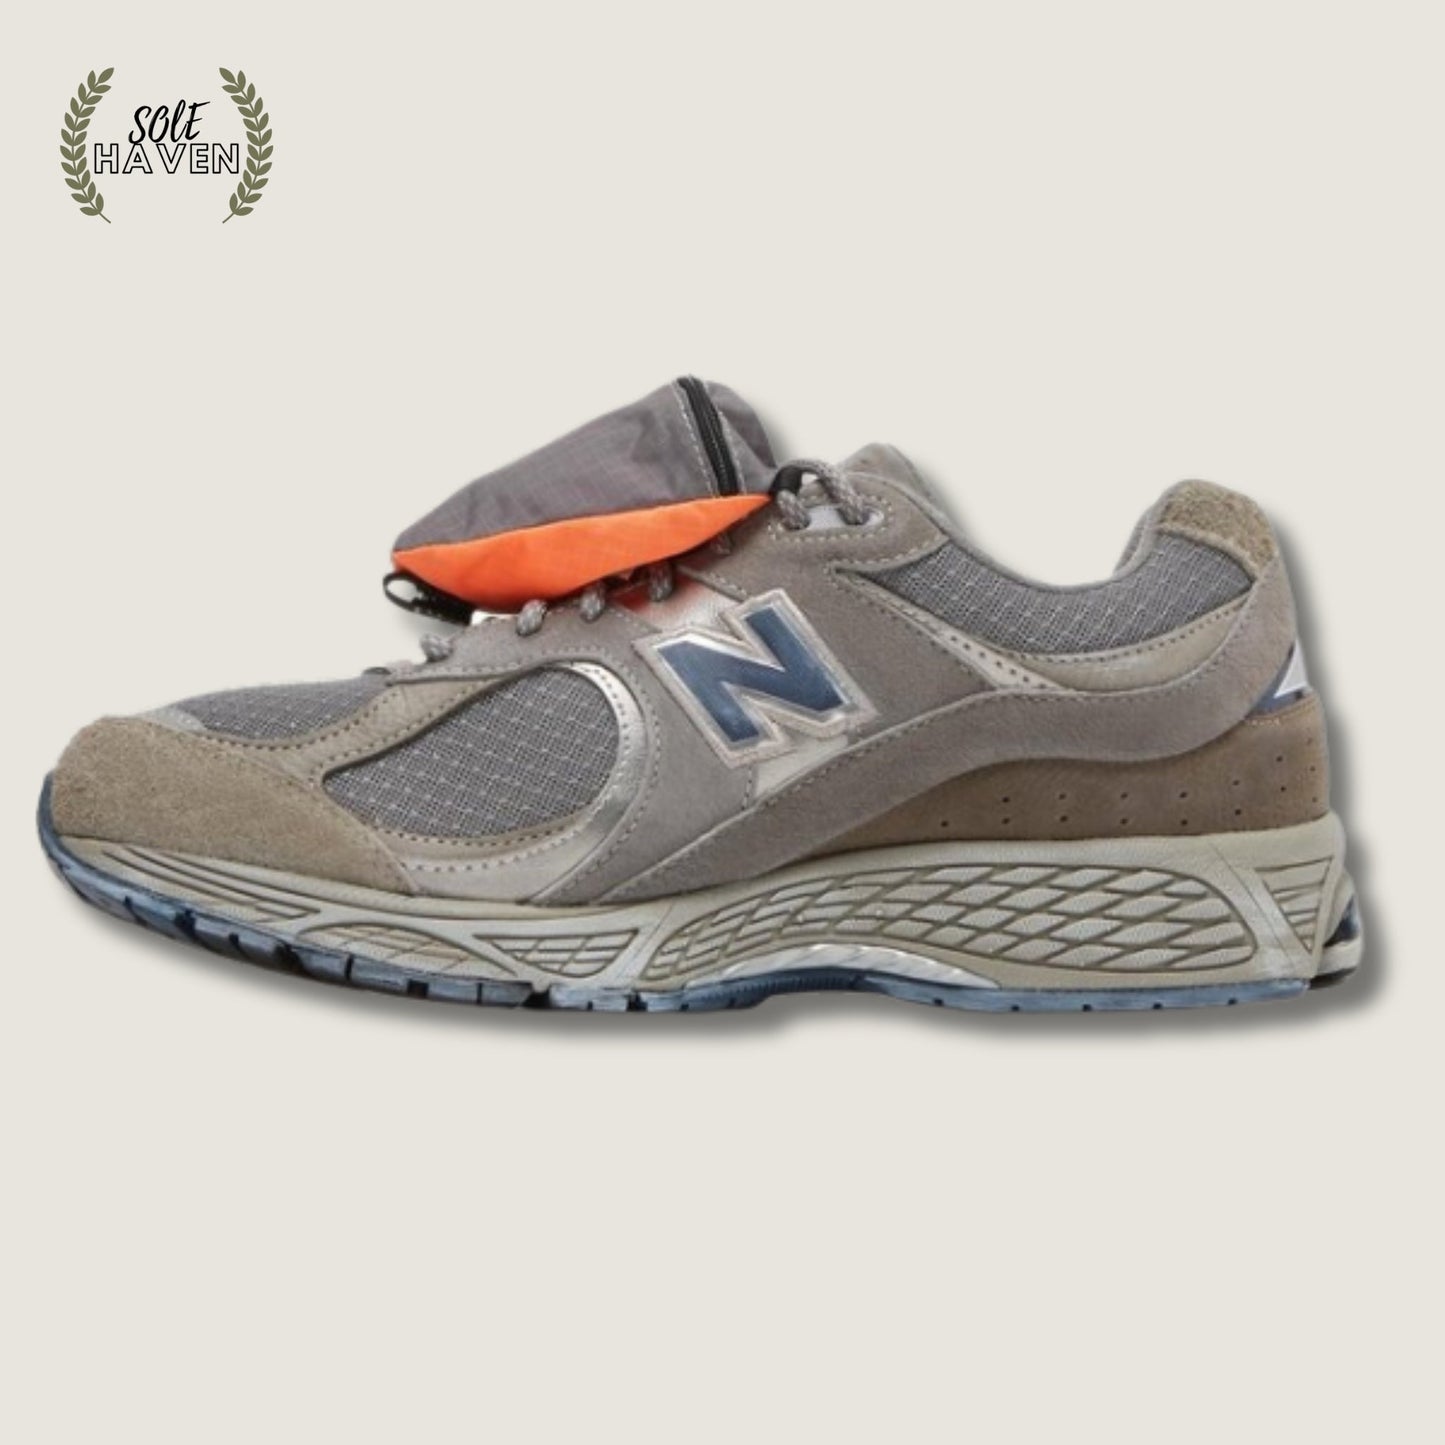 New Balance 2002R 'Pouch - Castle Grey' - Sole HavenShoesNew Balance